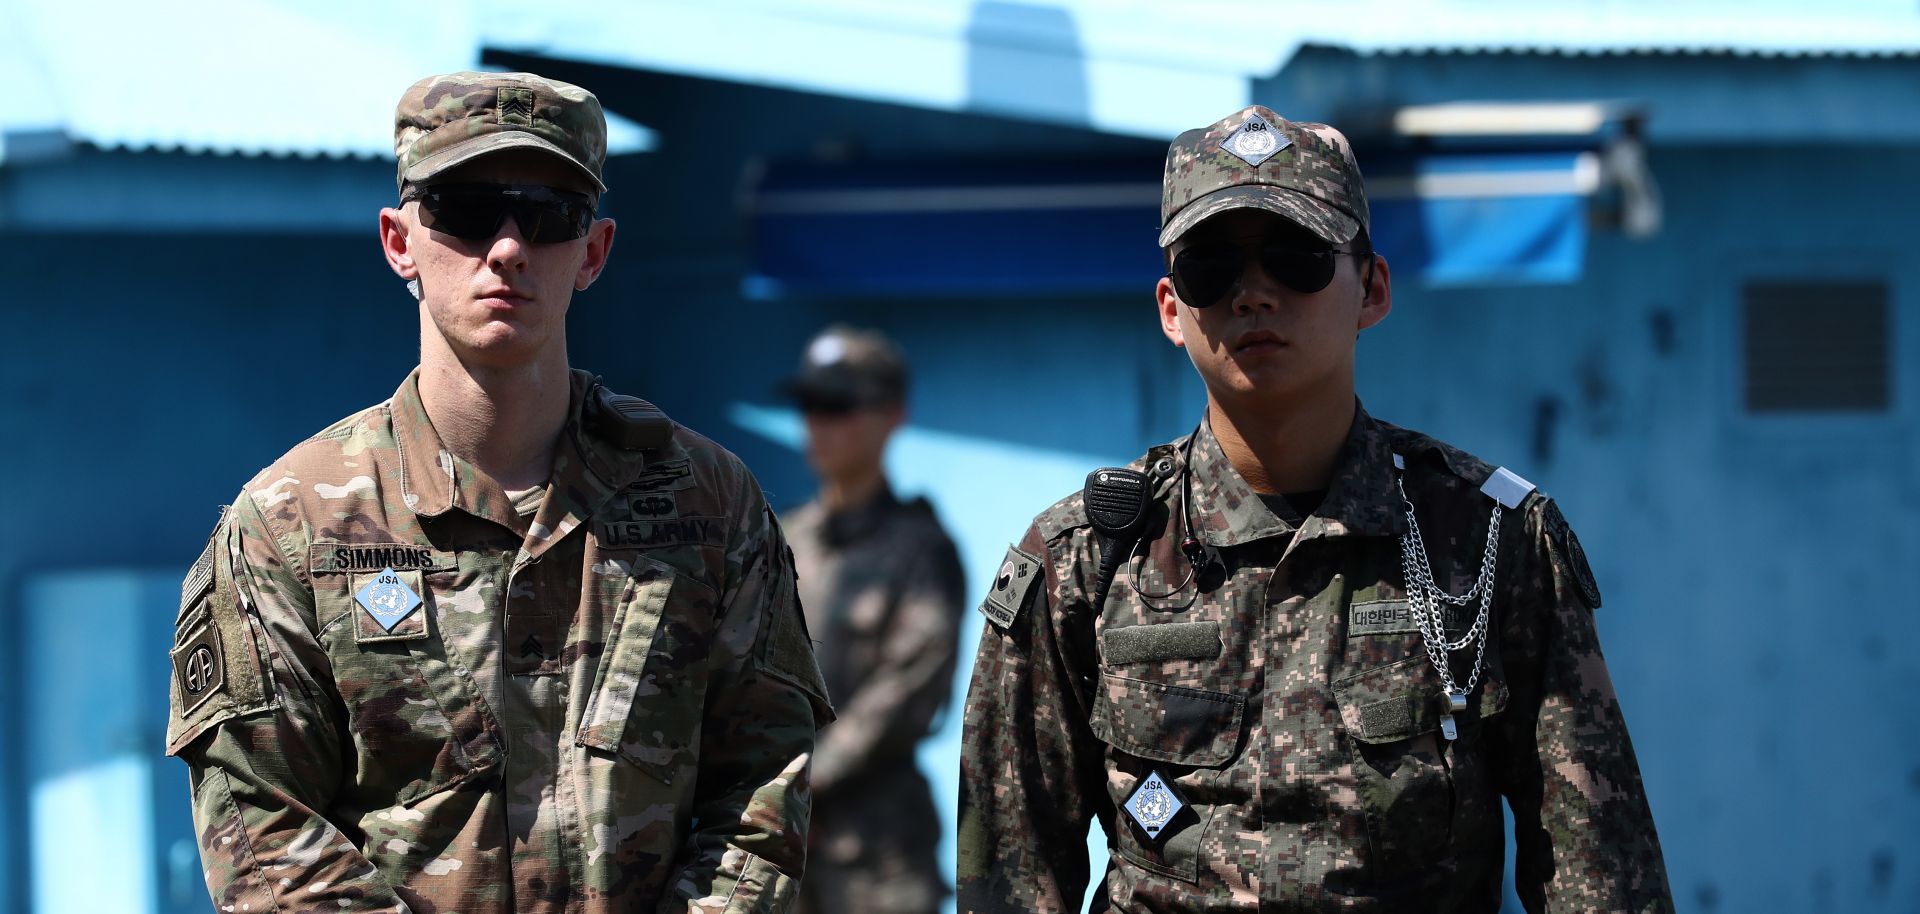 A U.S. soldier (left) stands guard next to a South Korean soldier (right) in Panmunjom, South Korea, on July 27, 2019, during a ceremony commemorating the 66th anniversary of the signing of the Korean War Armistice Agreement.